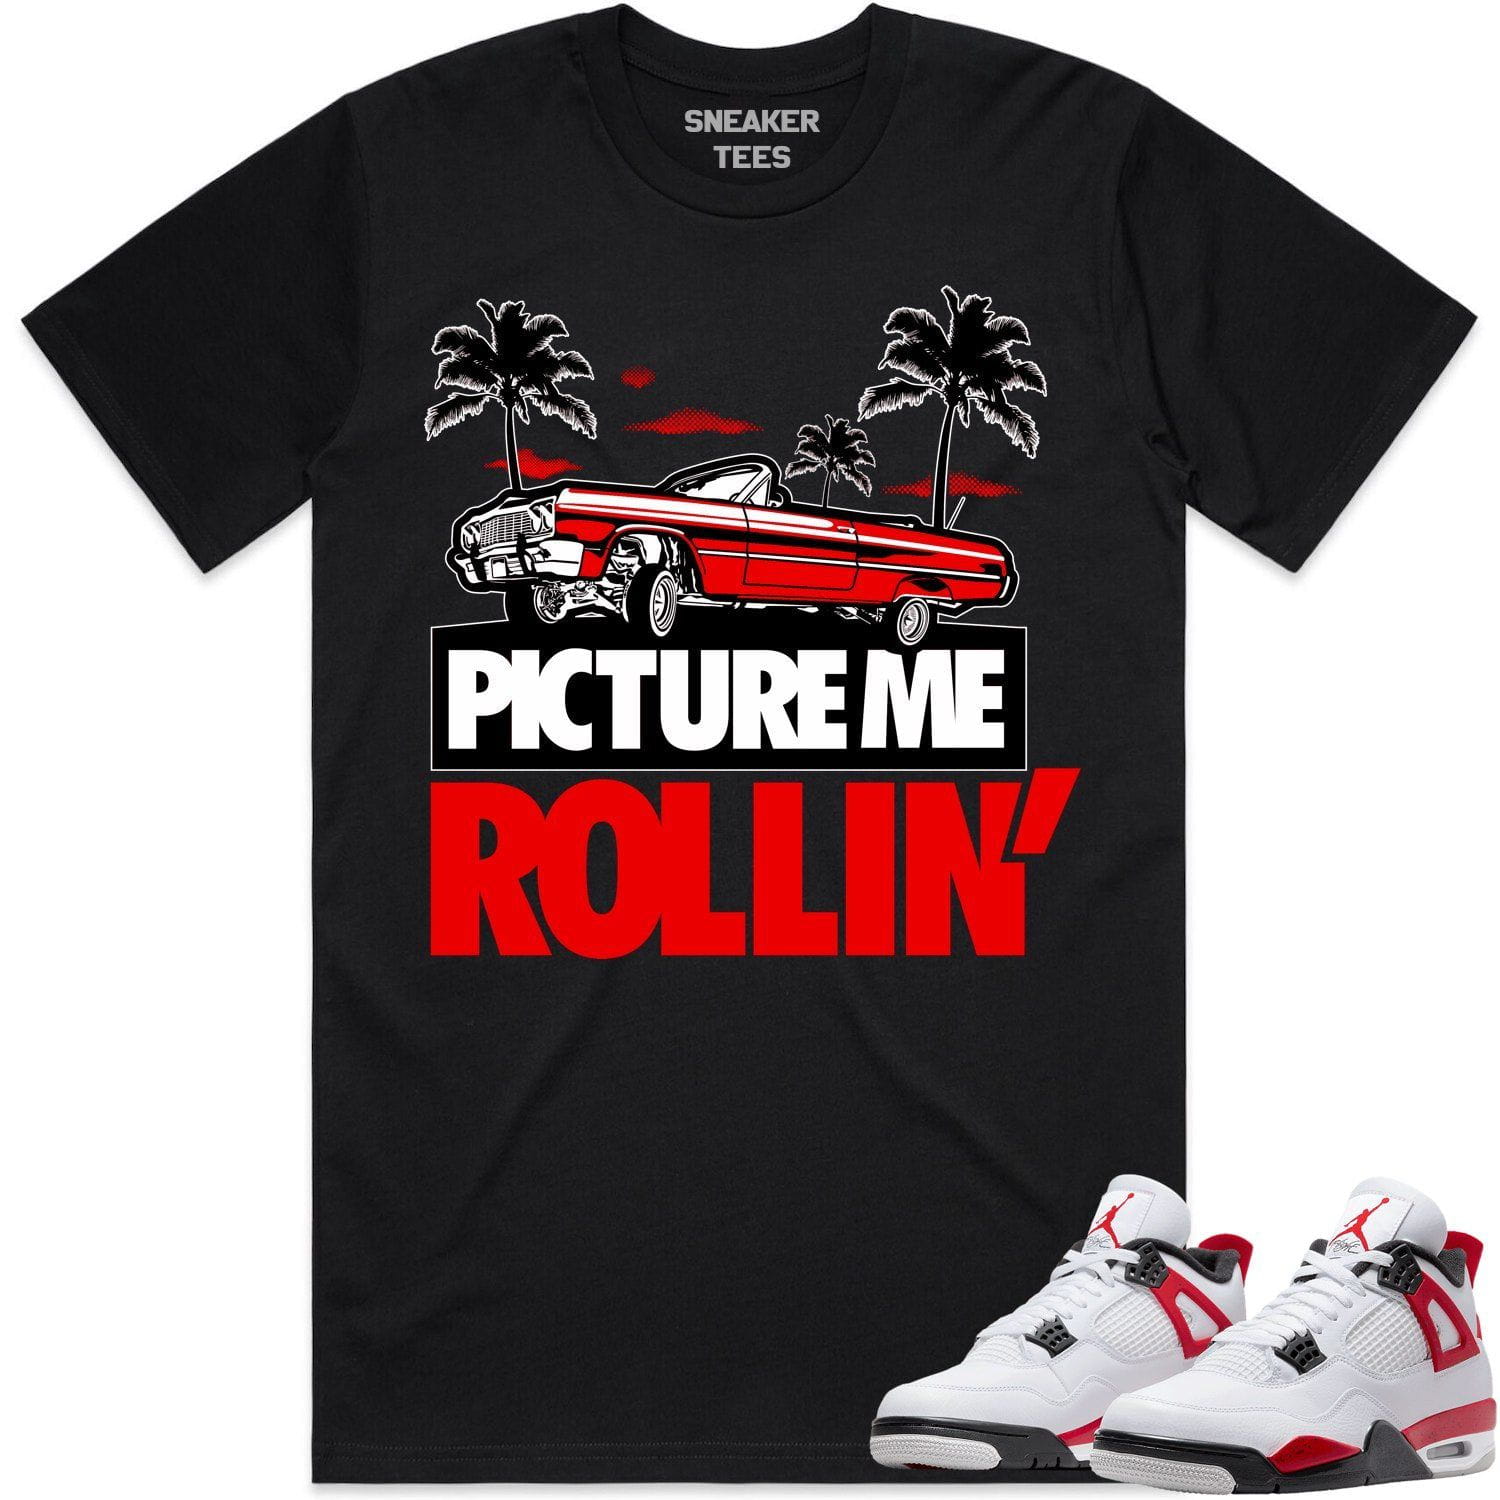 Red Cement 4s Shirt - Jordan Retro 4 Red Cement Shirts - Red Picture